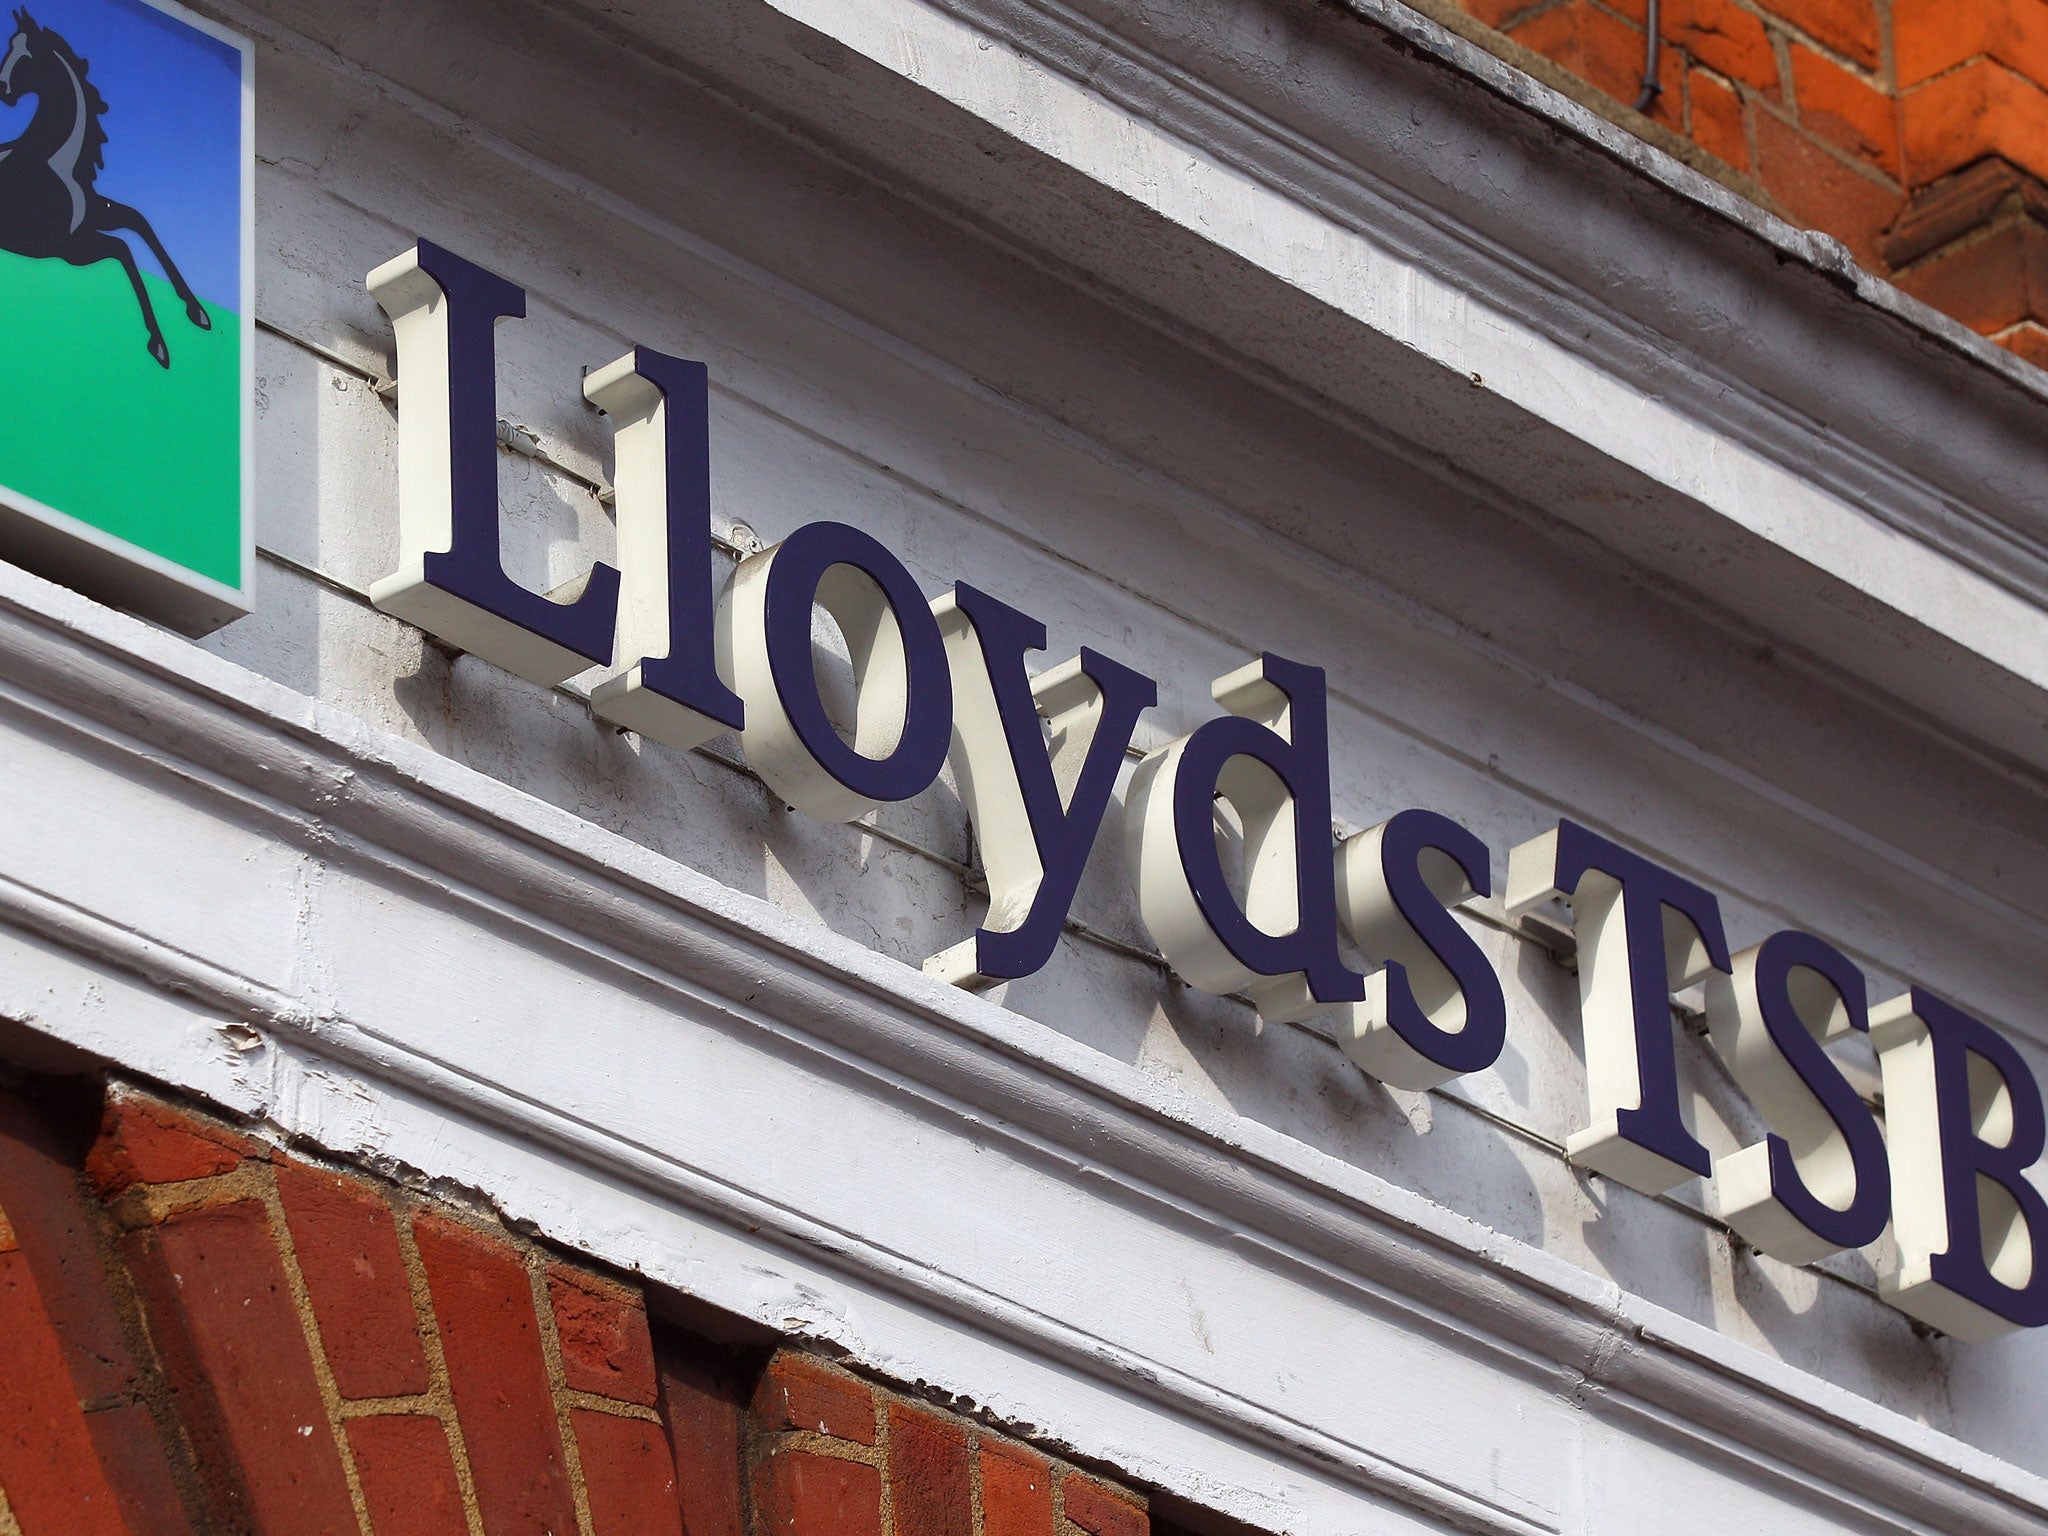 Lloyds shares rose 1.14p or 1.5 per cent to 79.15p in morning trading